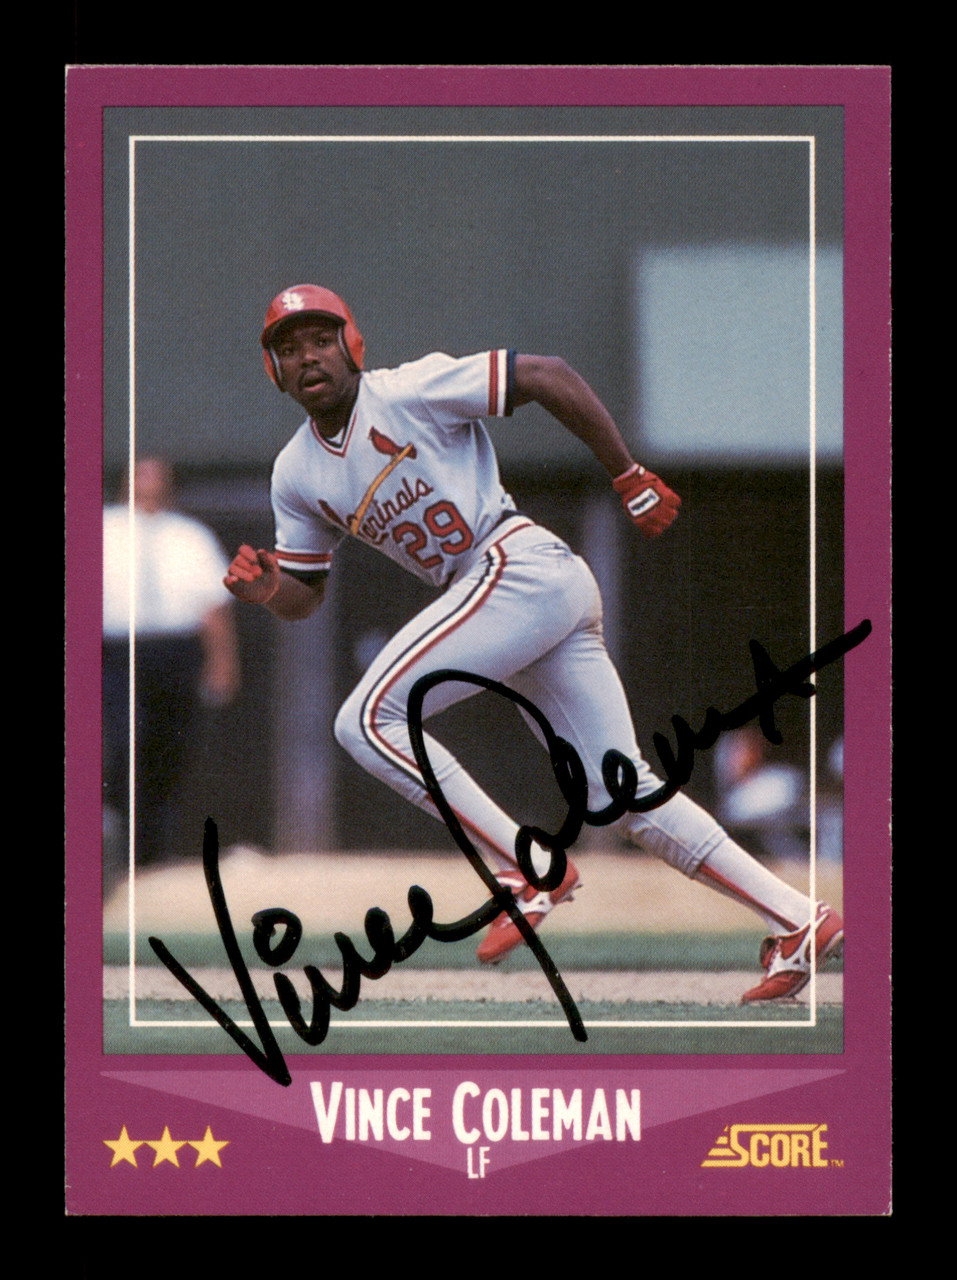 1986 Topps Vince Coleman